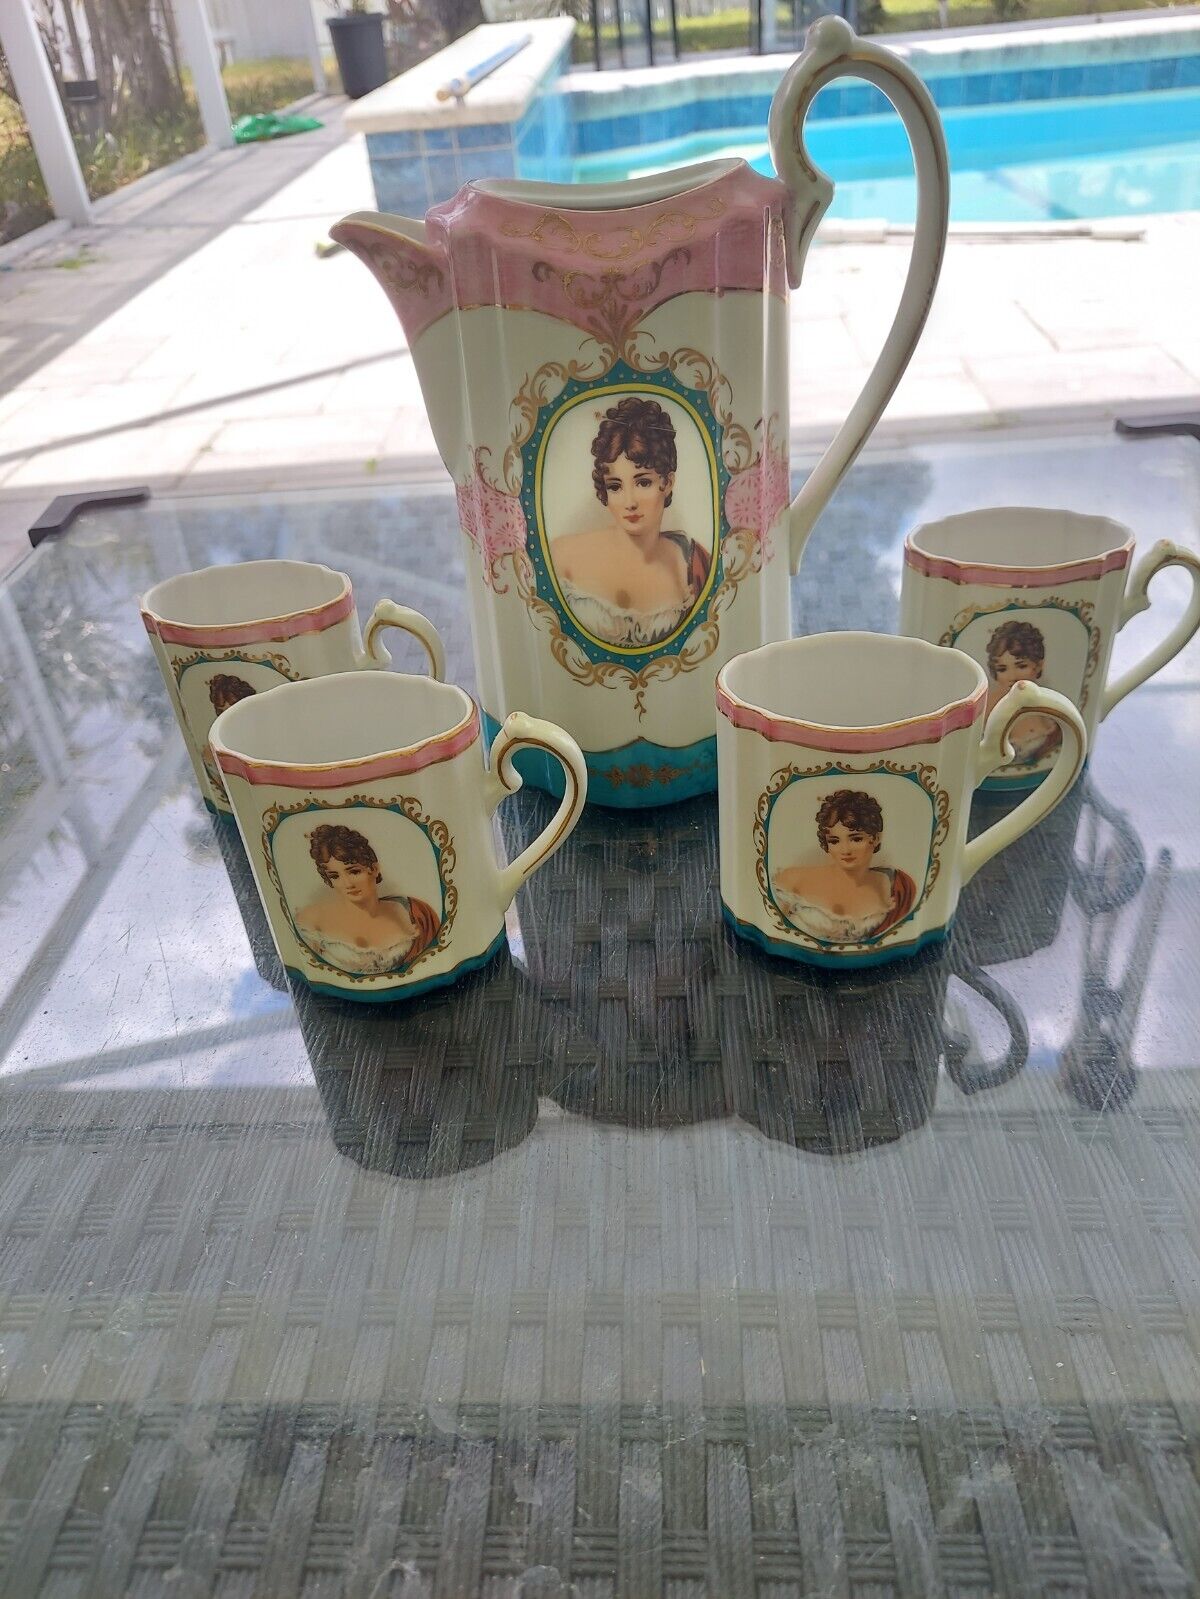 Royal Vienna Antique Chocolate Pot and 4 cups- missing top of pot